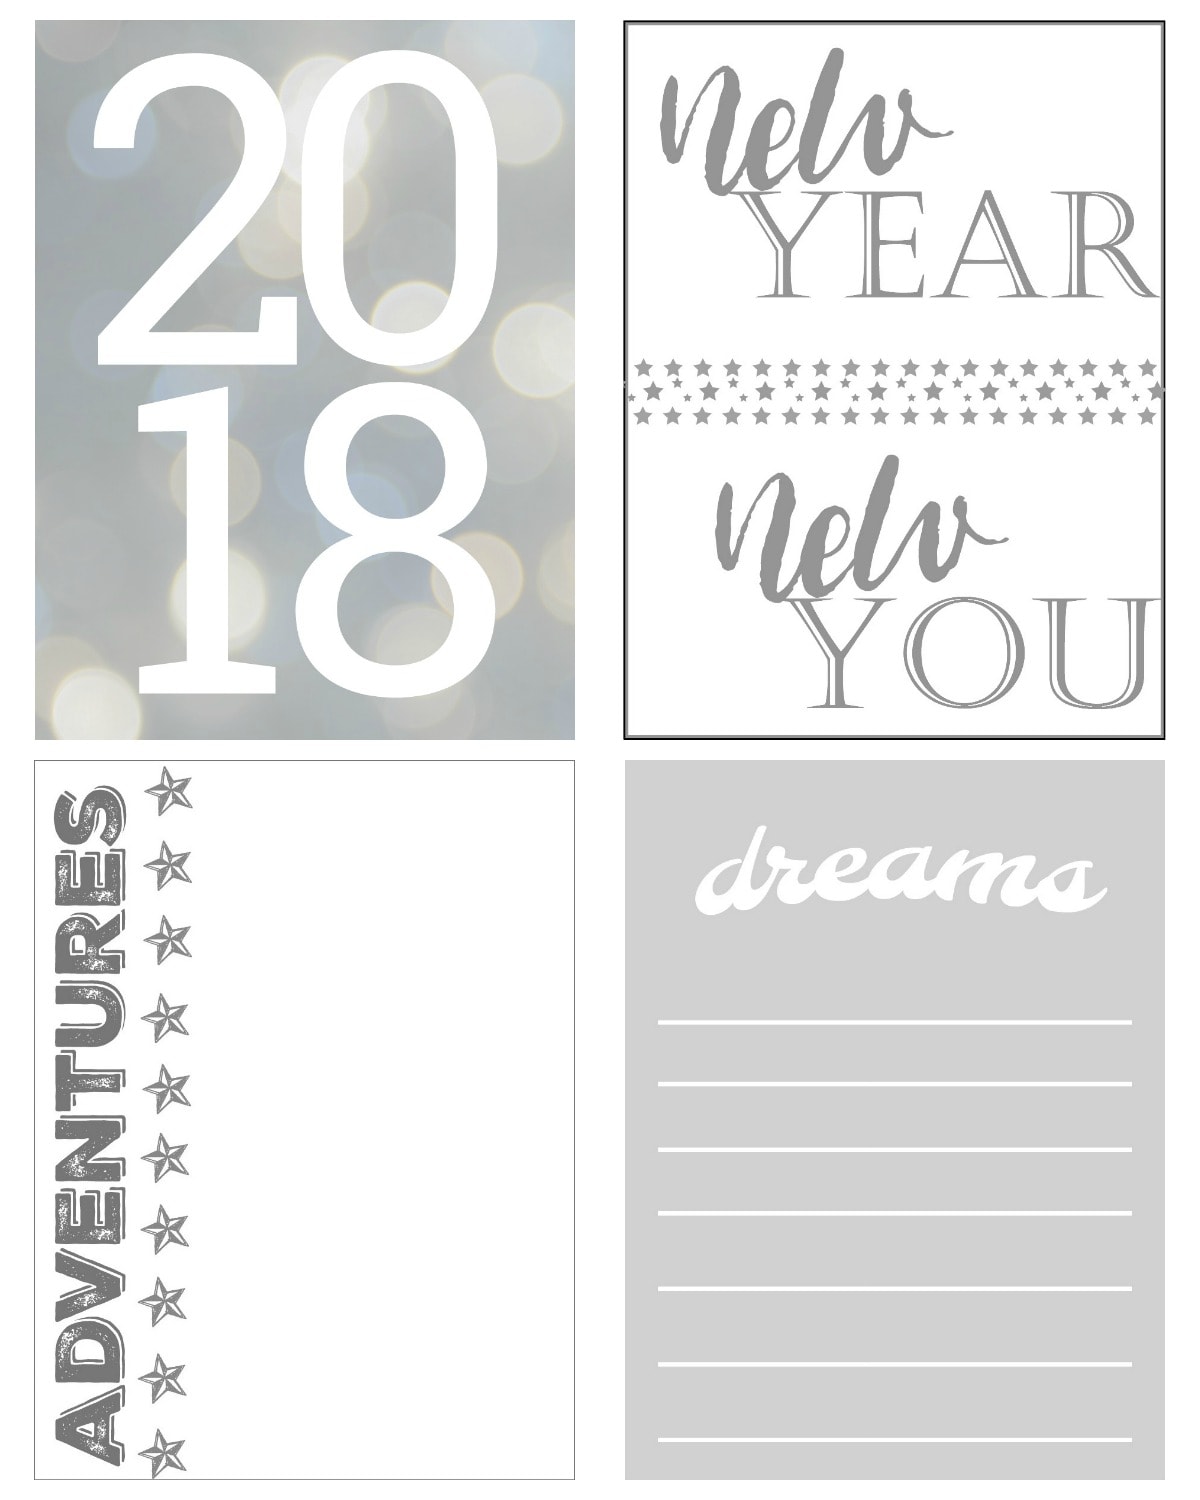 New Year Pocket Cards